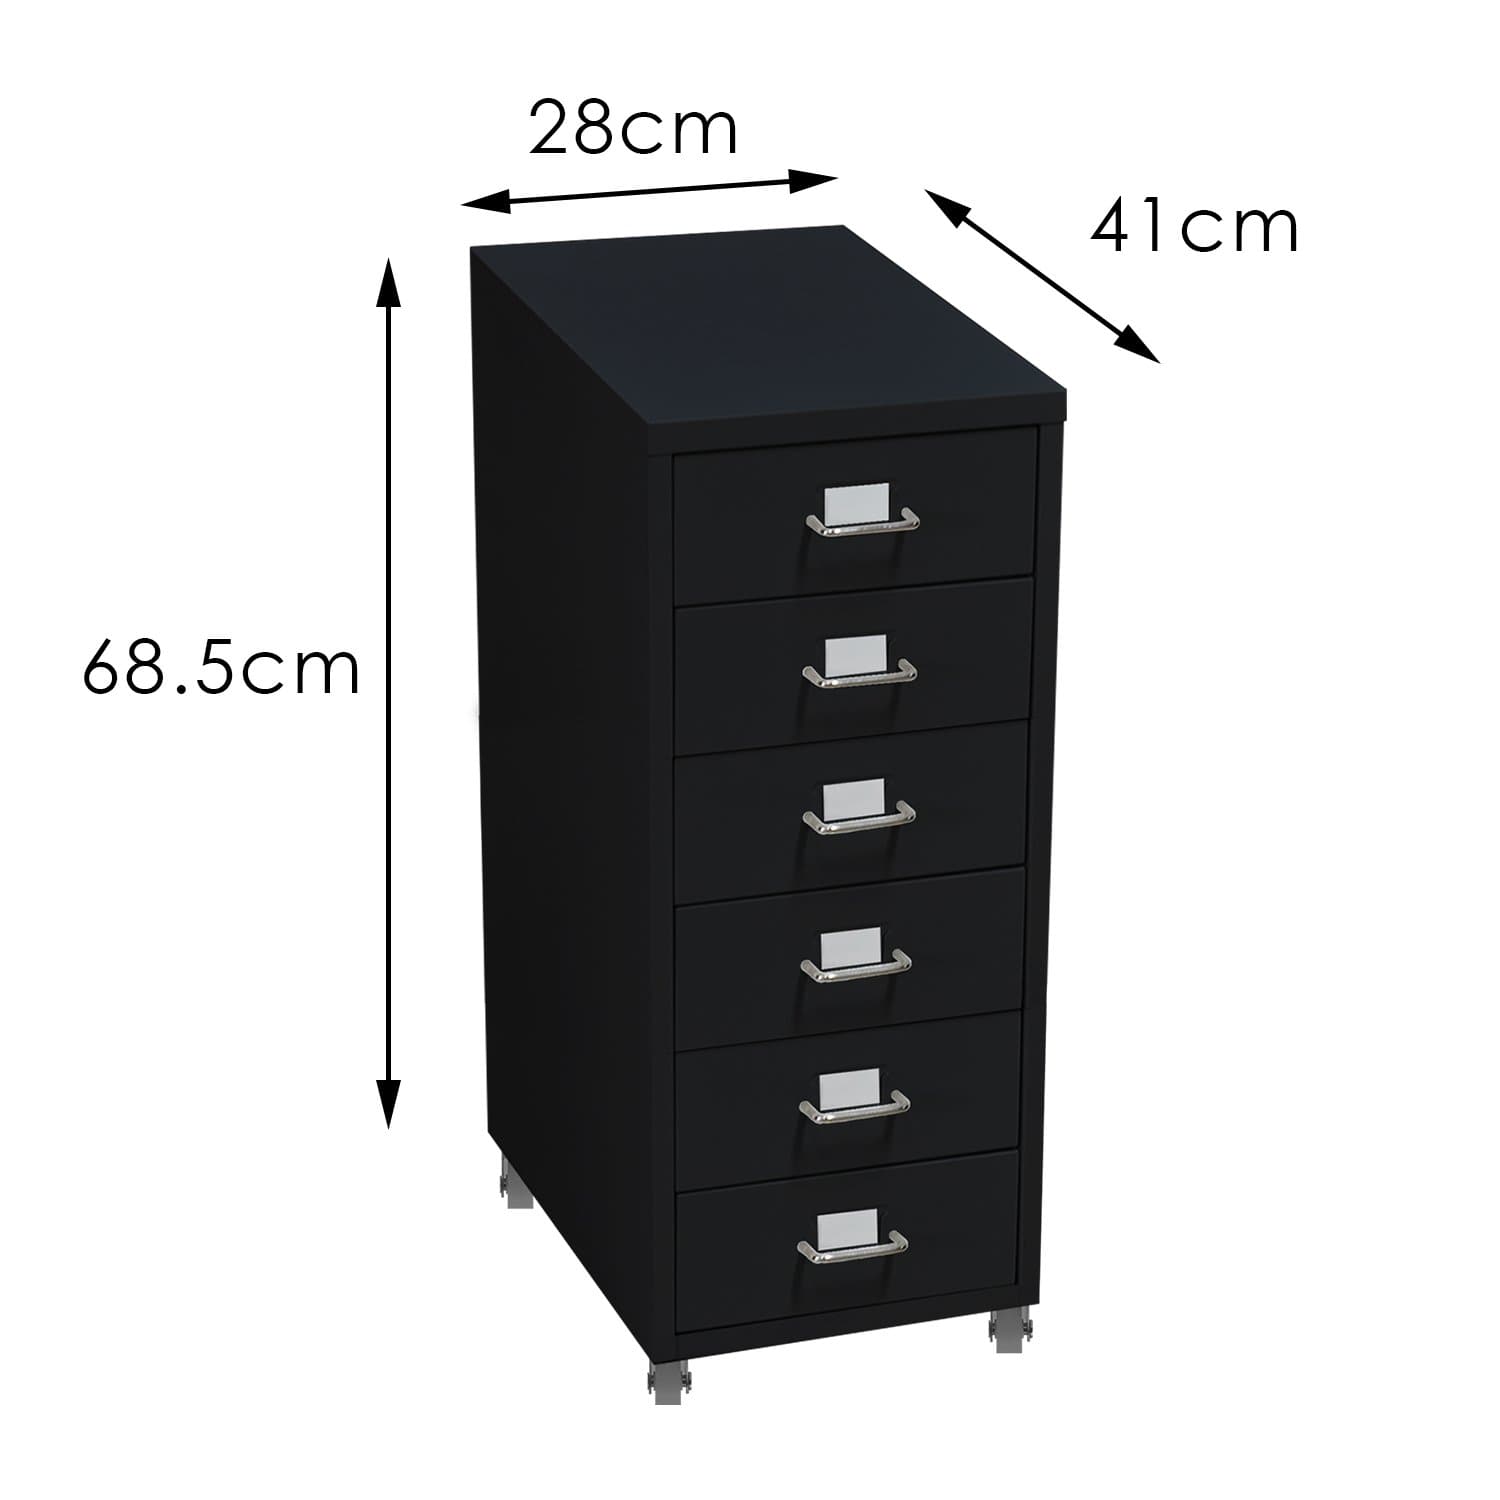 office & study 6 Tiers Steel Orgainer Metal File Cabinet With Drawers Office Furniture Black